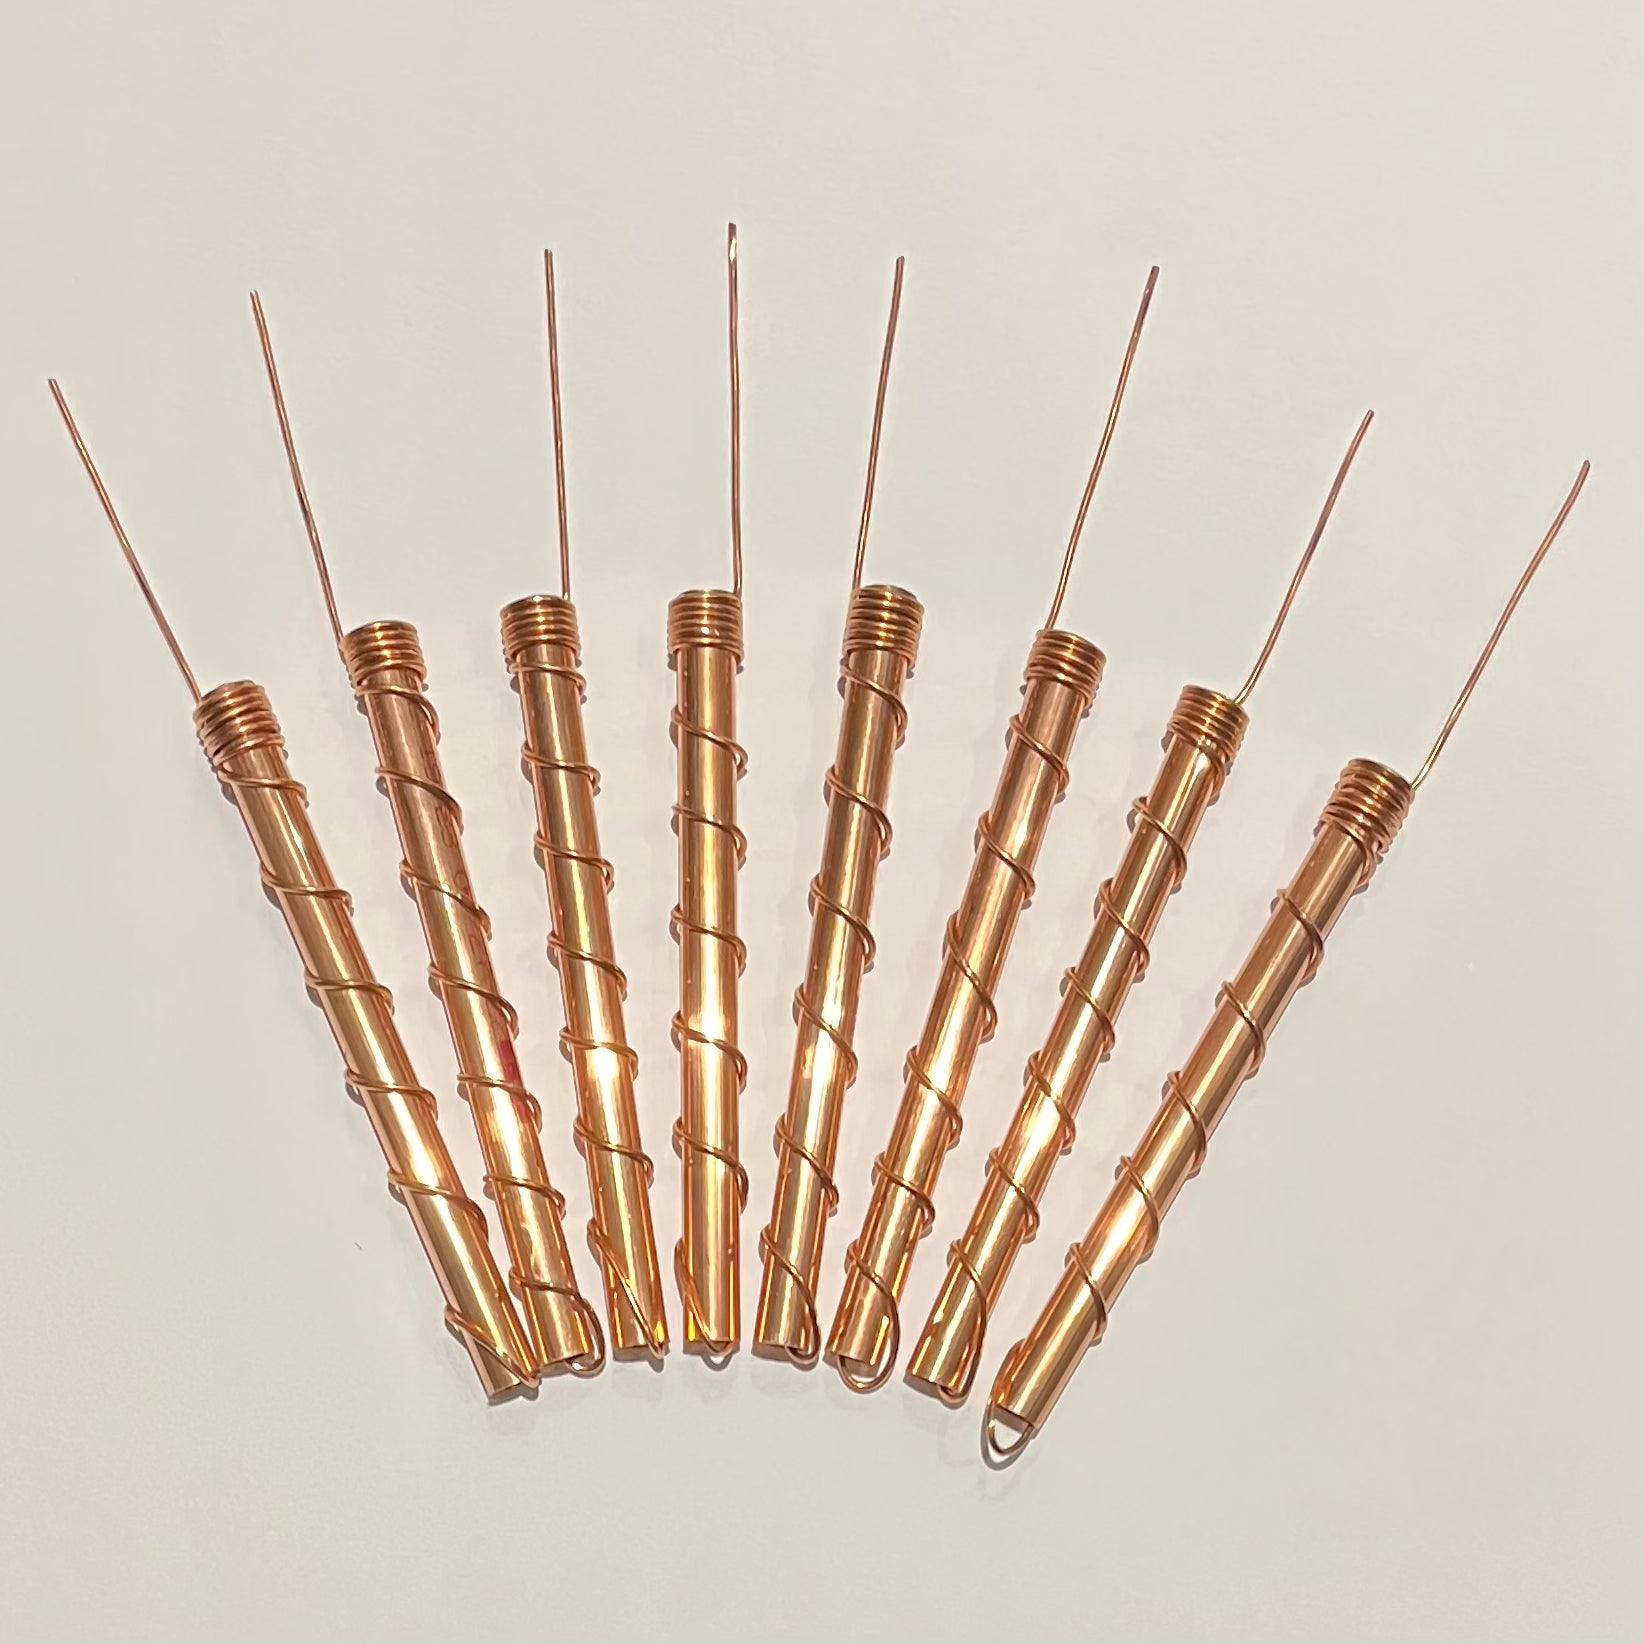 Premium Copper Wire for Enhanced Plant Growth Boost Your Garden's Potential